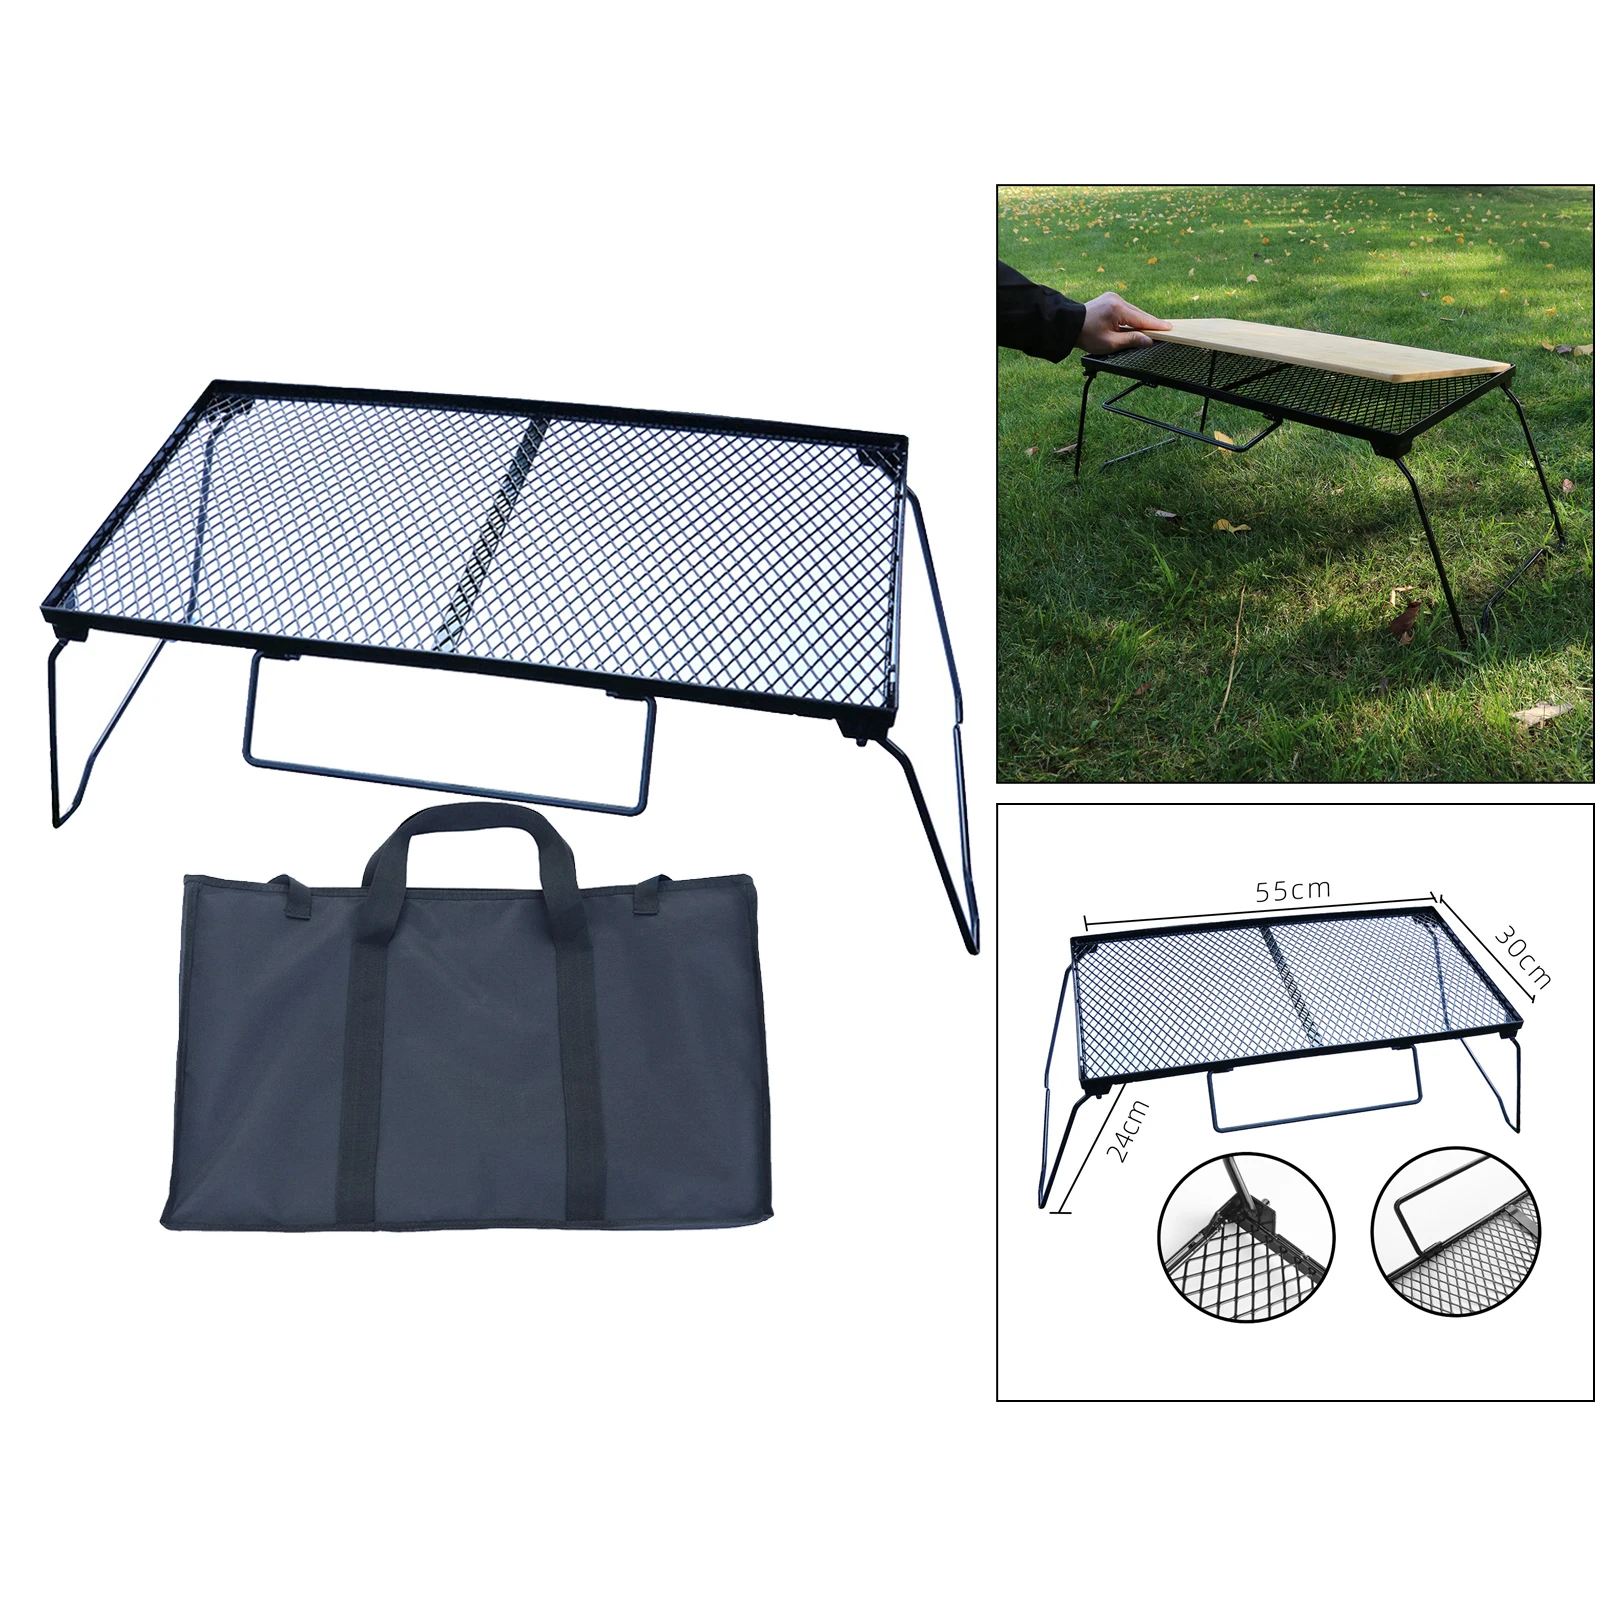 Iron Net Table Folding Table Camping Outdoor Lightweight for Camping, Beach, Backyards, BBQ, Party, Food Grill